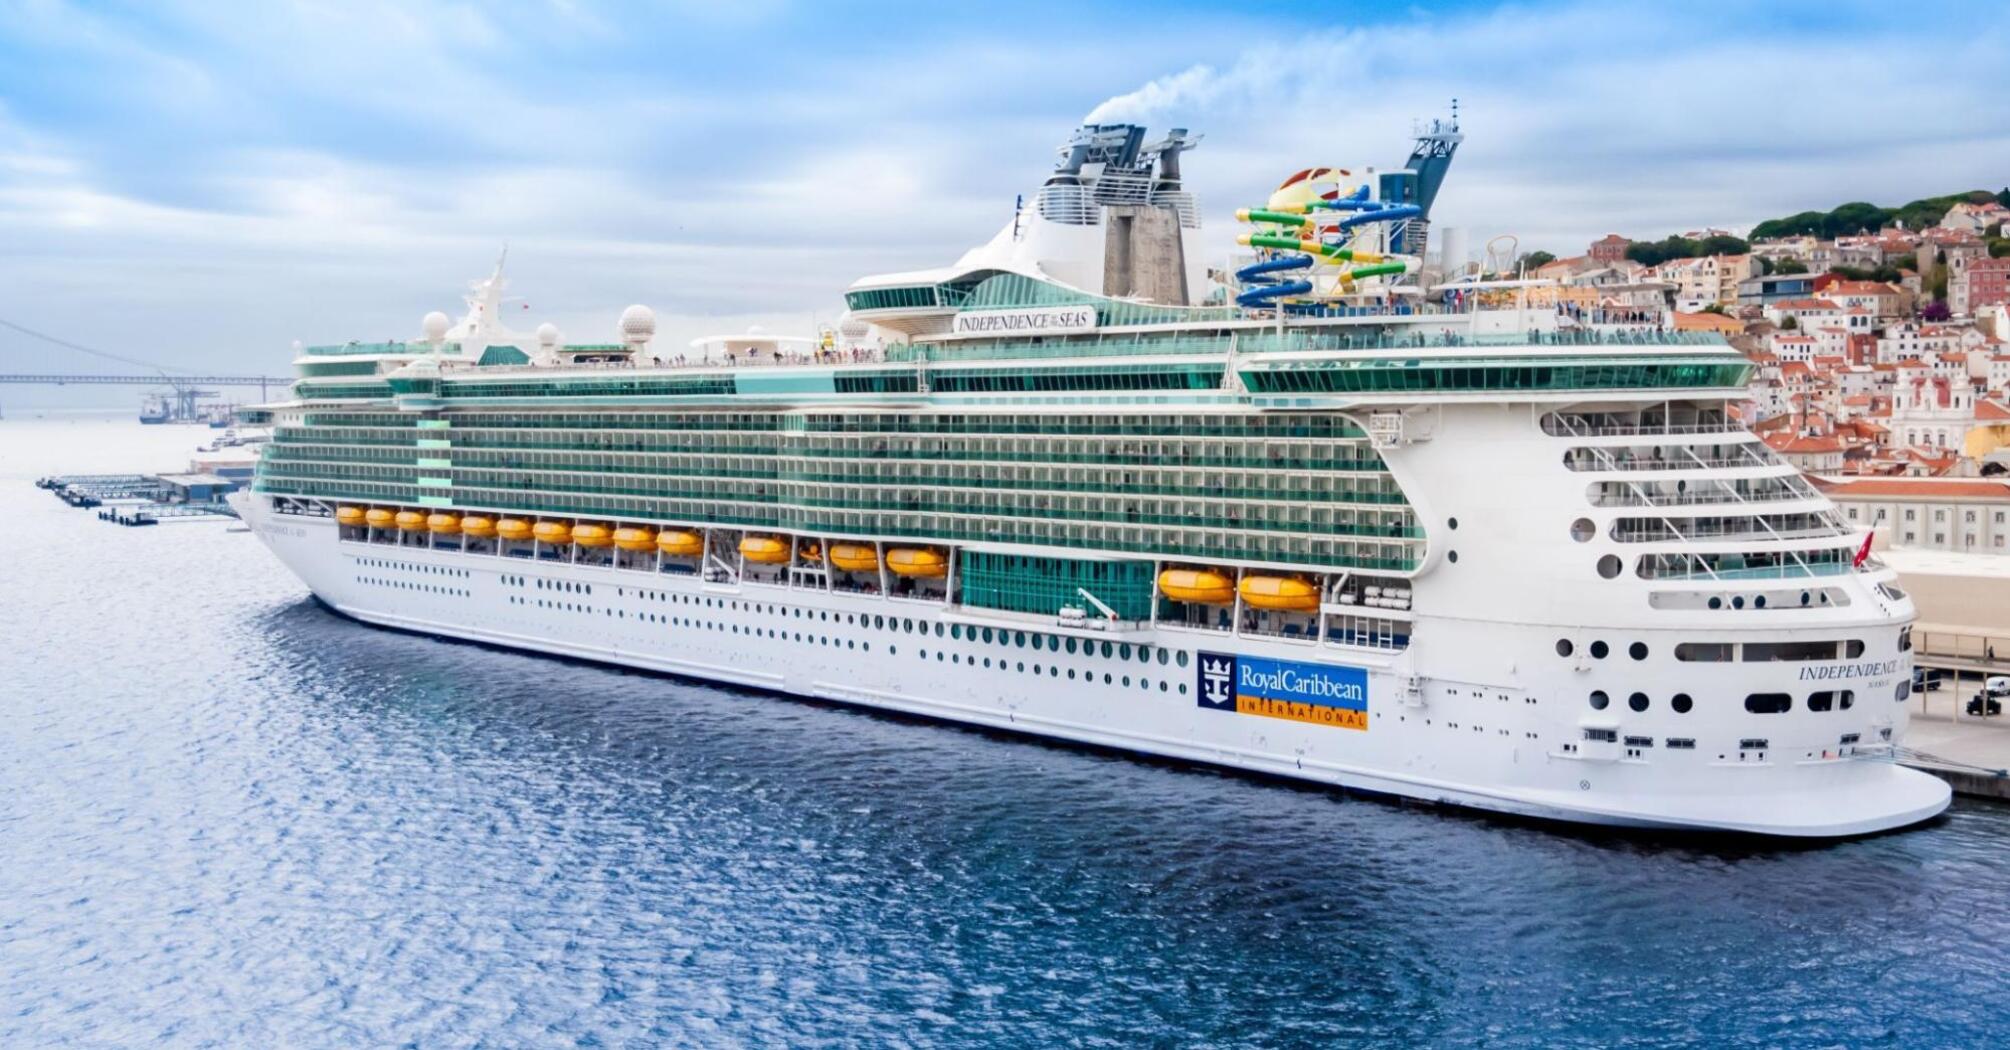 Cruise ship Royal Caribbean in all its glory